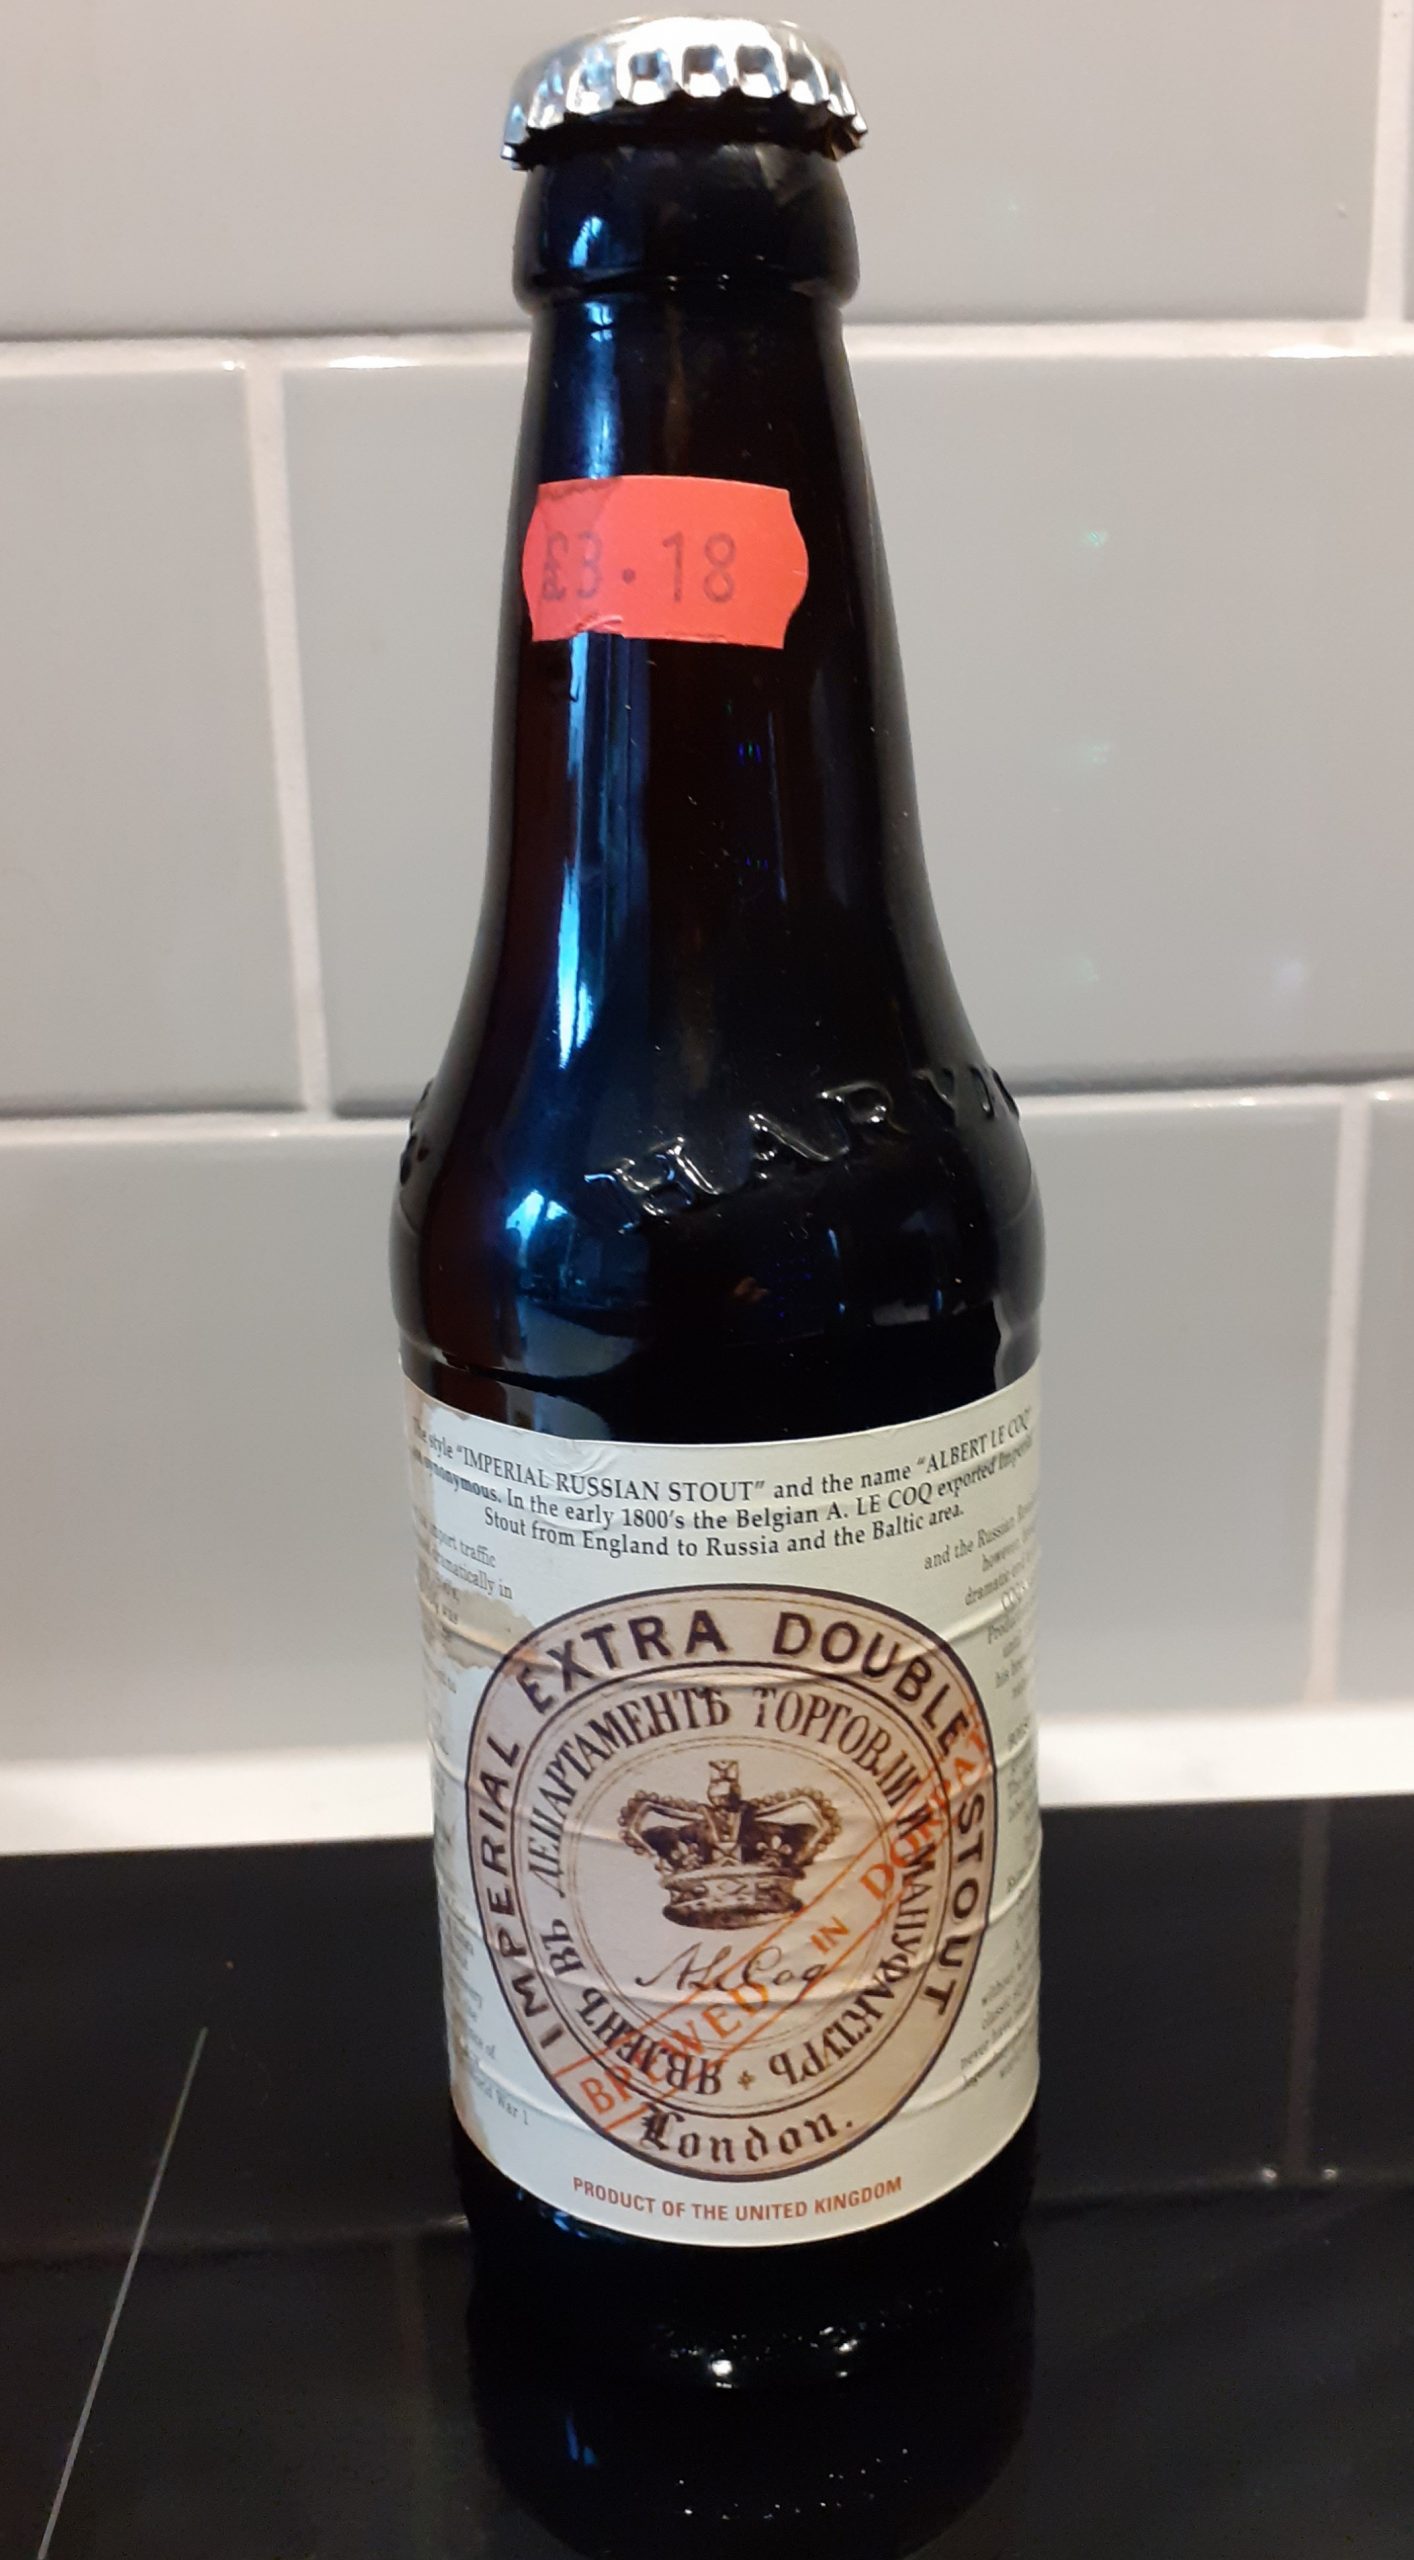 Brown bottle, cream label with brown writing in English and Russian - black base, grey background